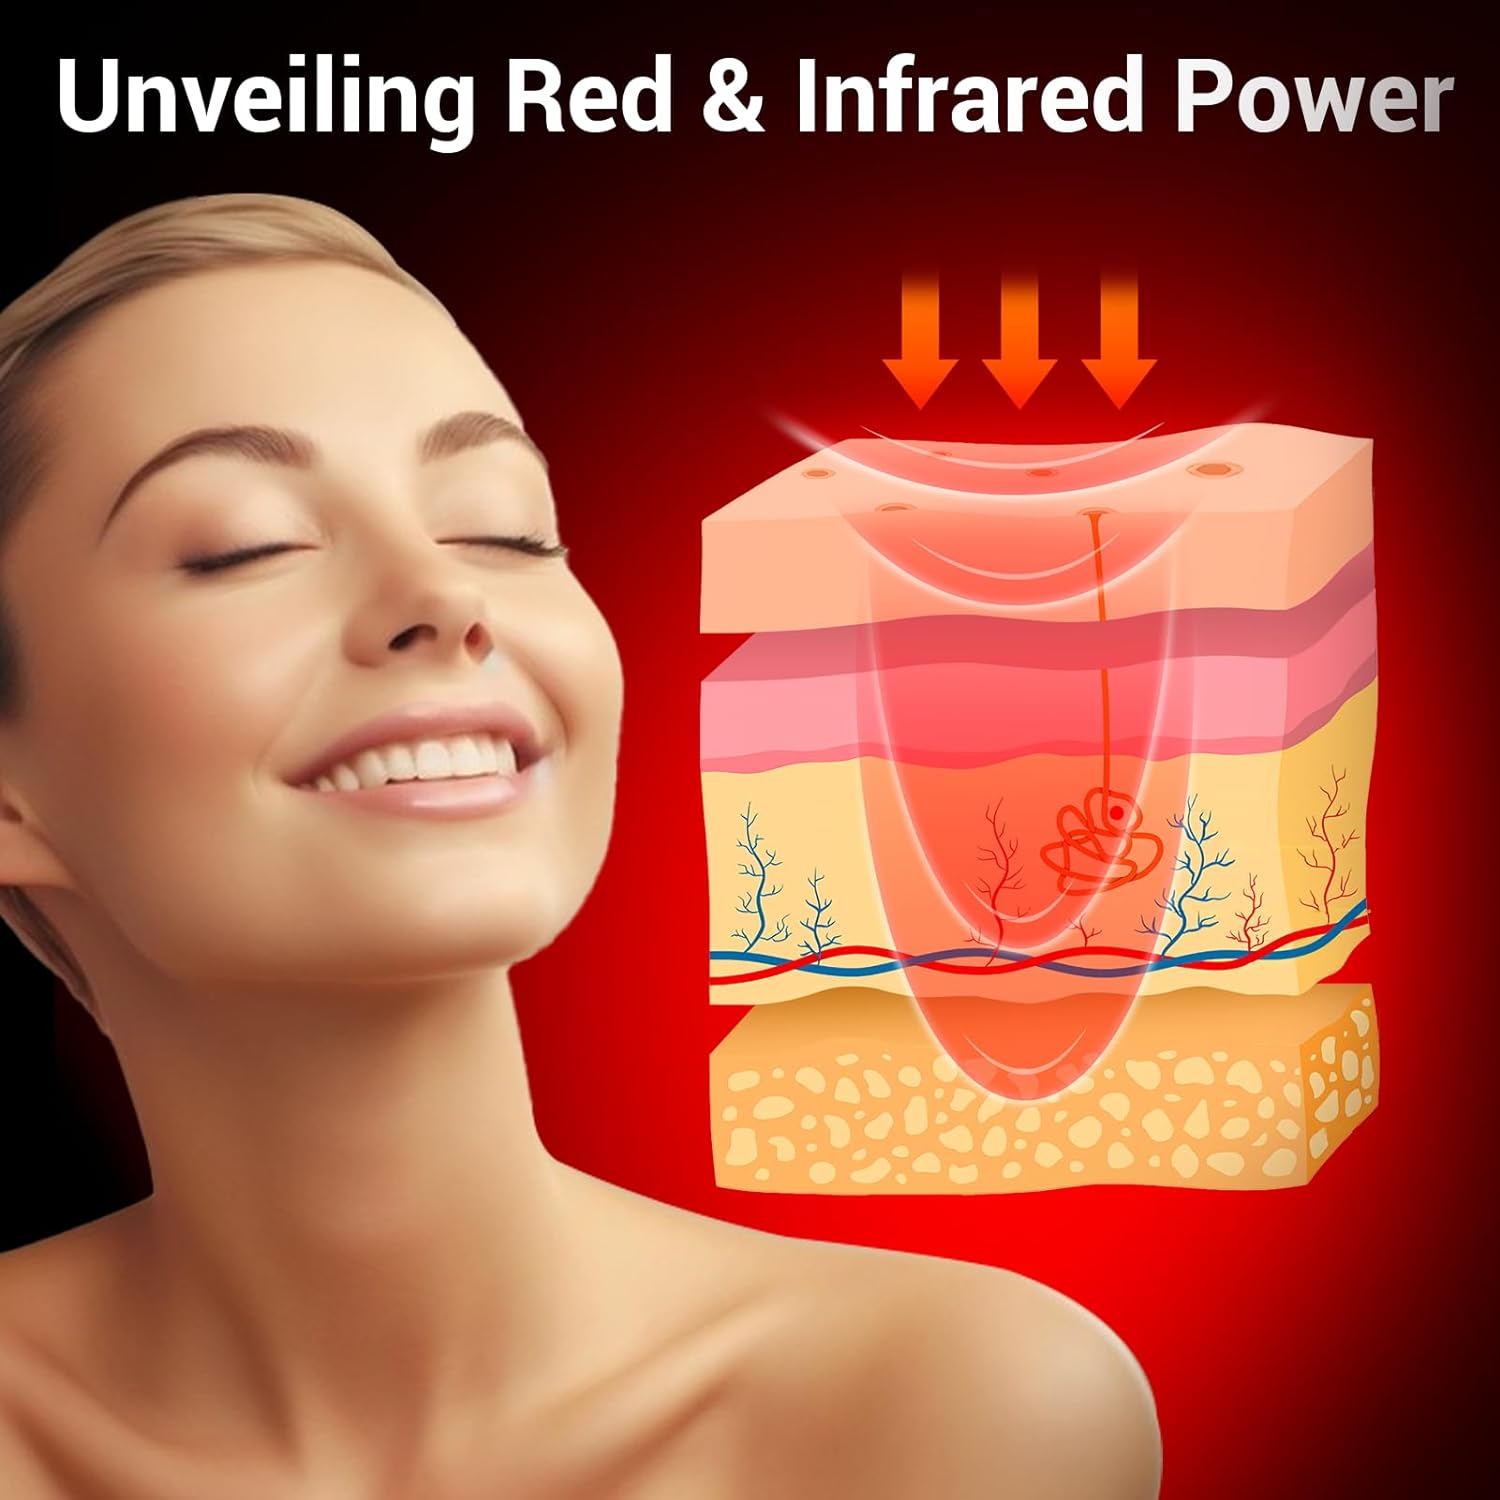 Comfytemp Red Light Therapy for Face